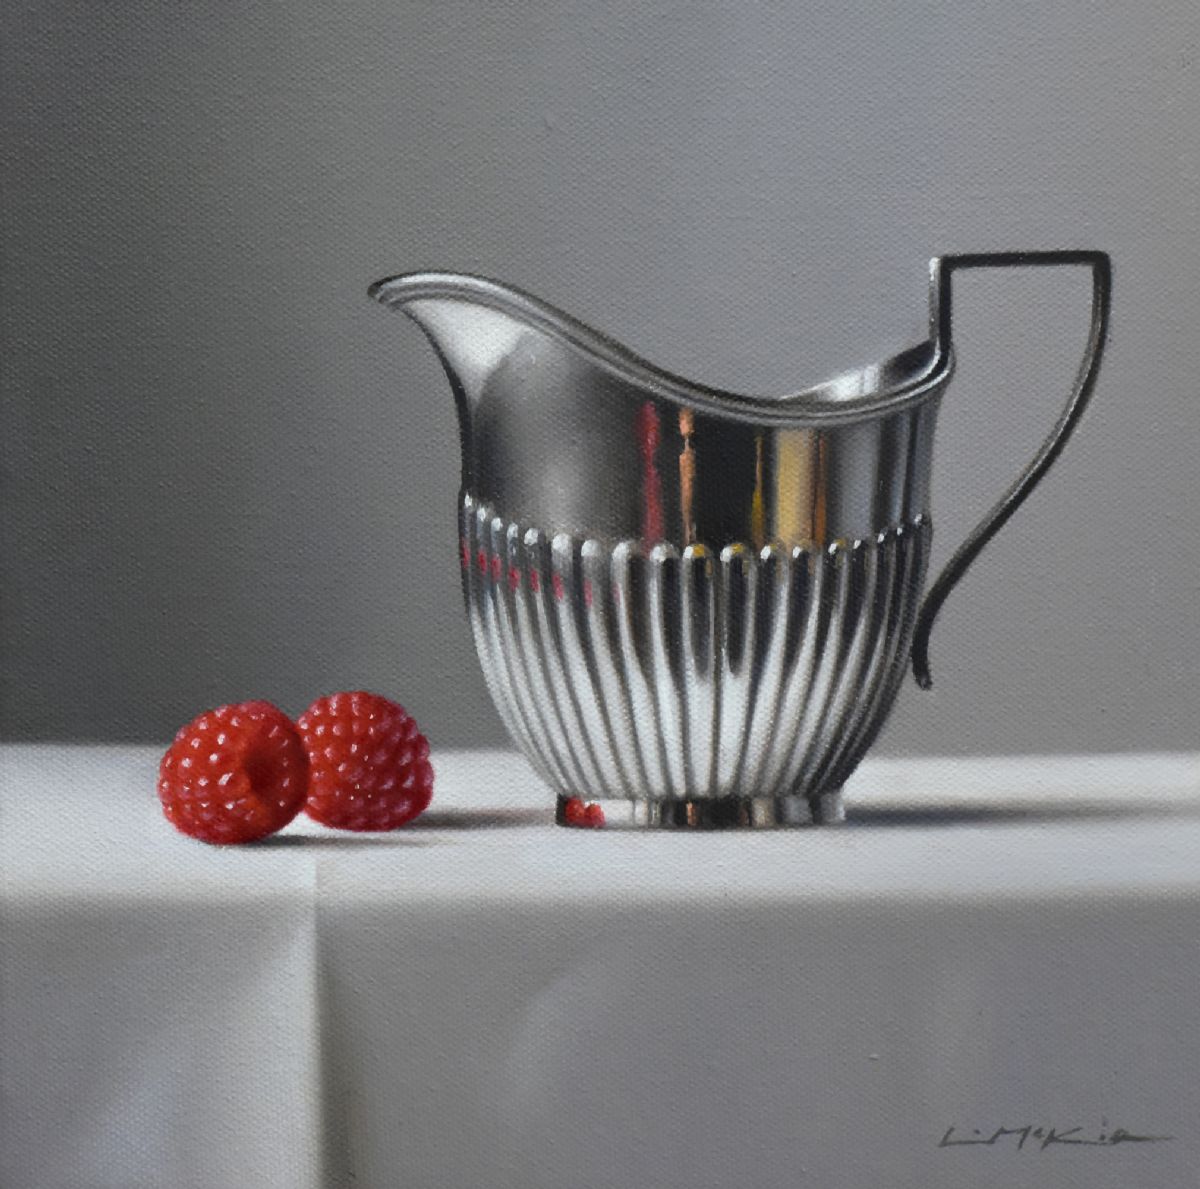 Two raspberries with Silver Jug